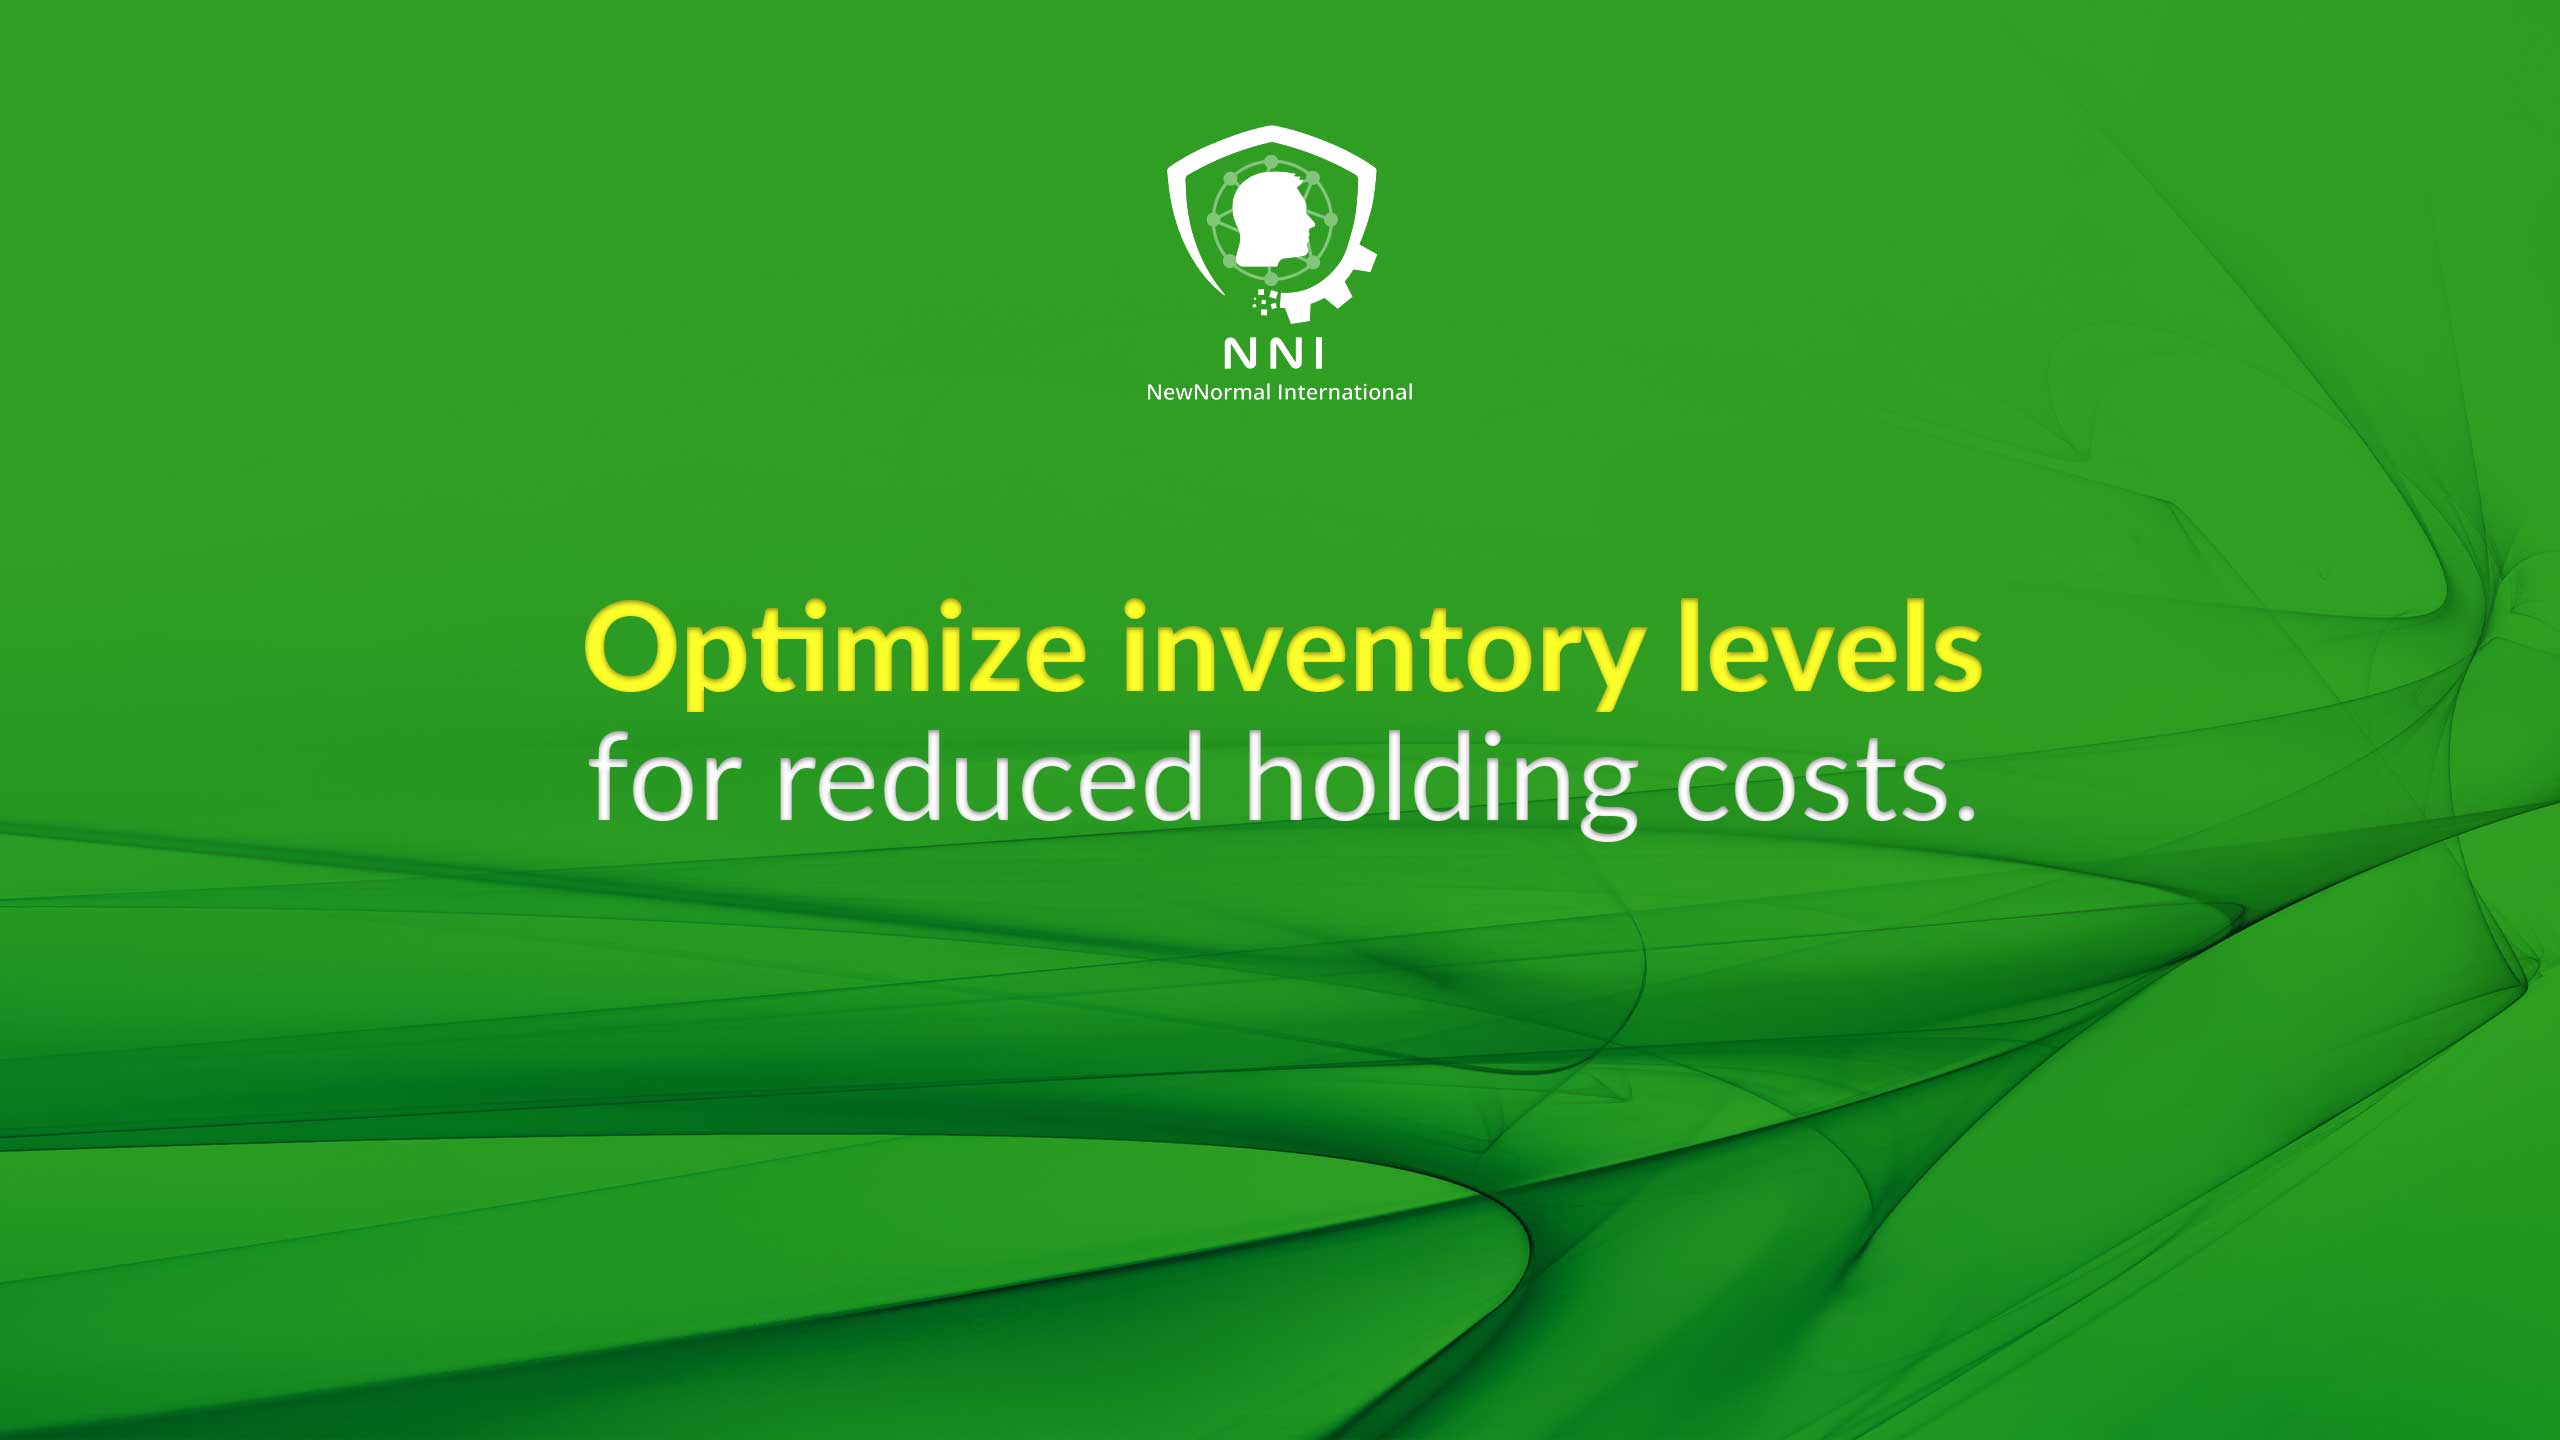 Optimize Inventory Levels for Reduced Holding Costs